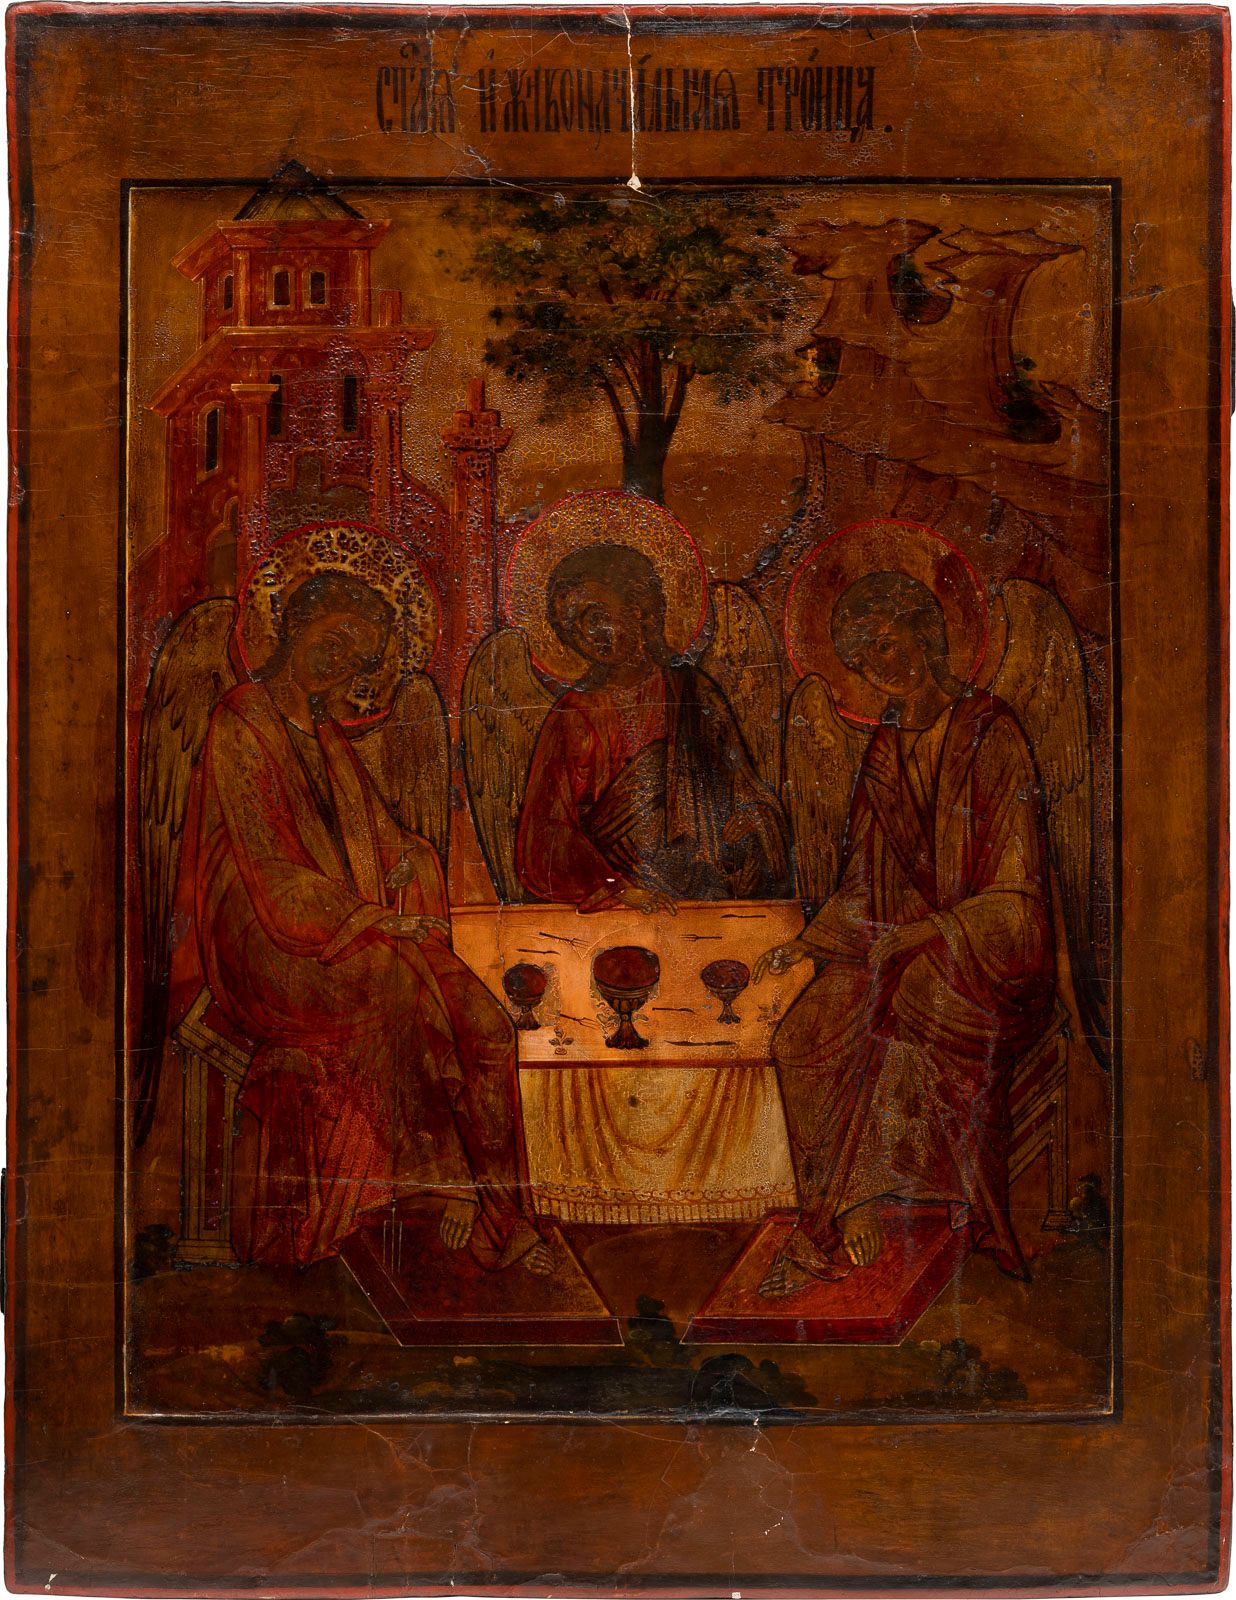 A MONUMENTAL ICON SHOWING THE OLD TESTAMENT TRINITY FROM A A MONUMENTAL ICON SHO&hellip;